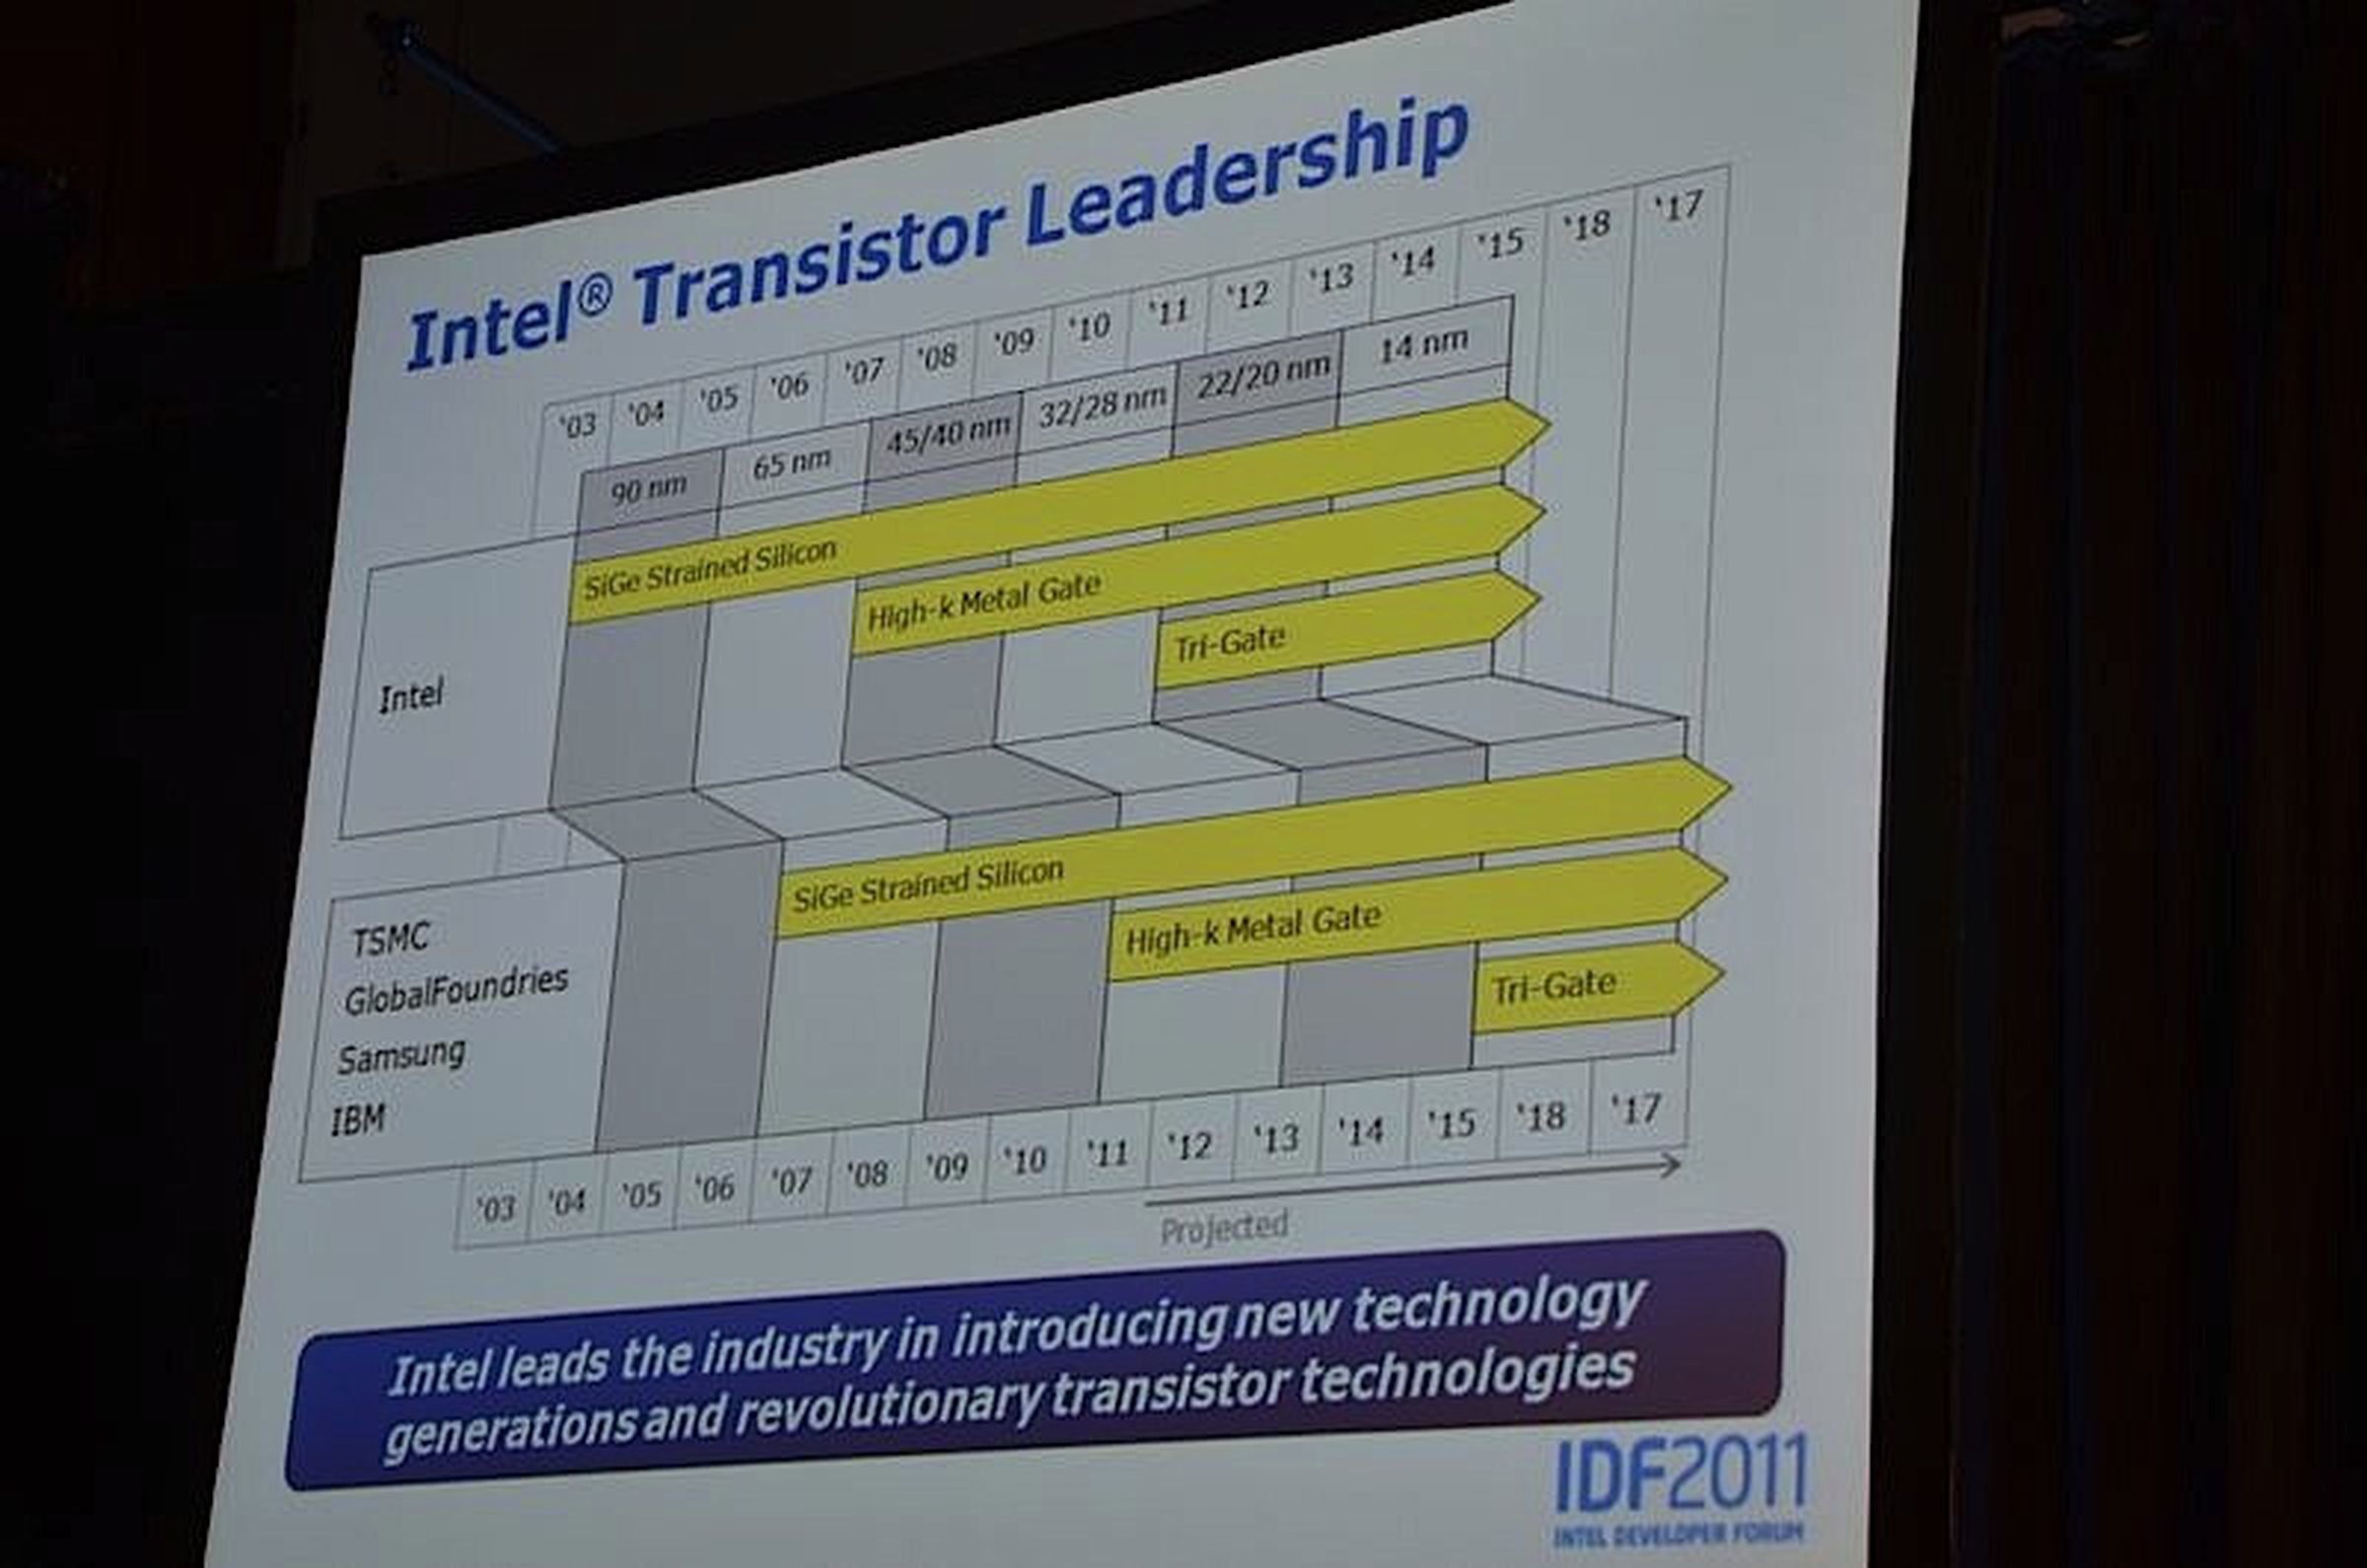 Intel Ivy Bridge roadmap: production in Q4 2011, on sale in first half of 2012